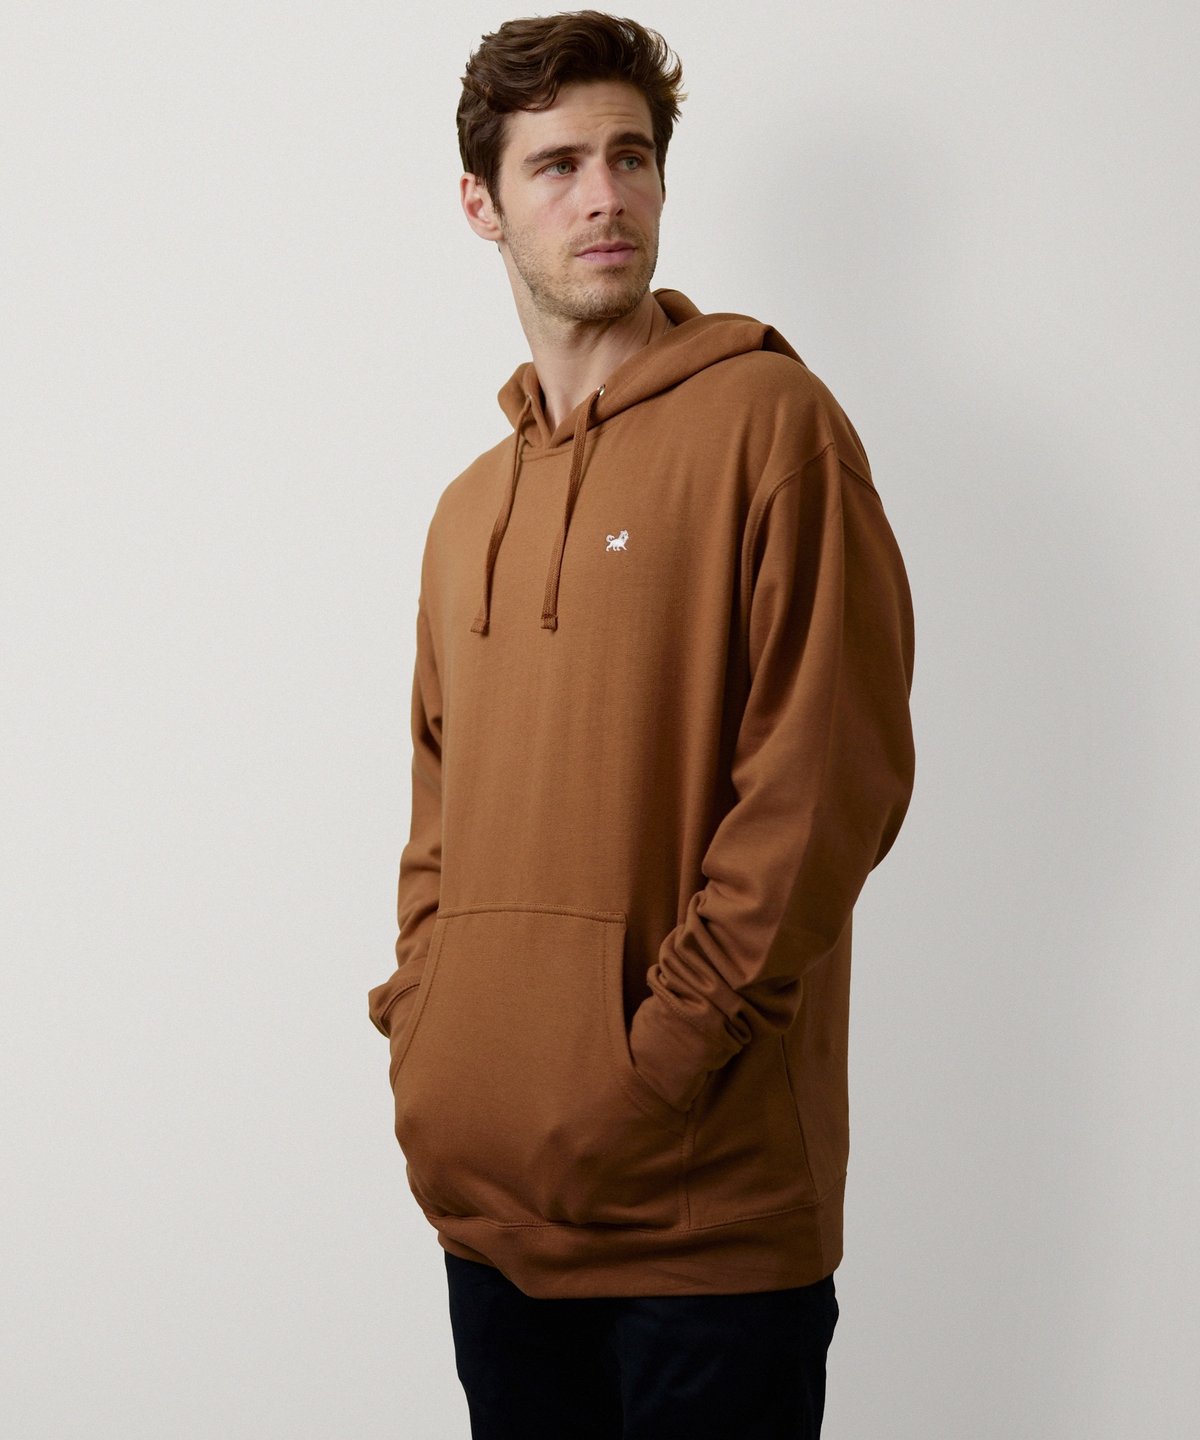 Signature Pullover Hoodie for Men (Saddle)